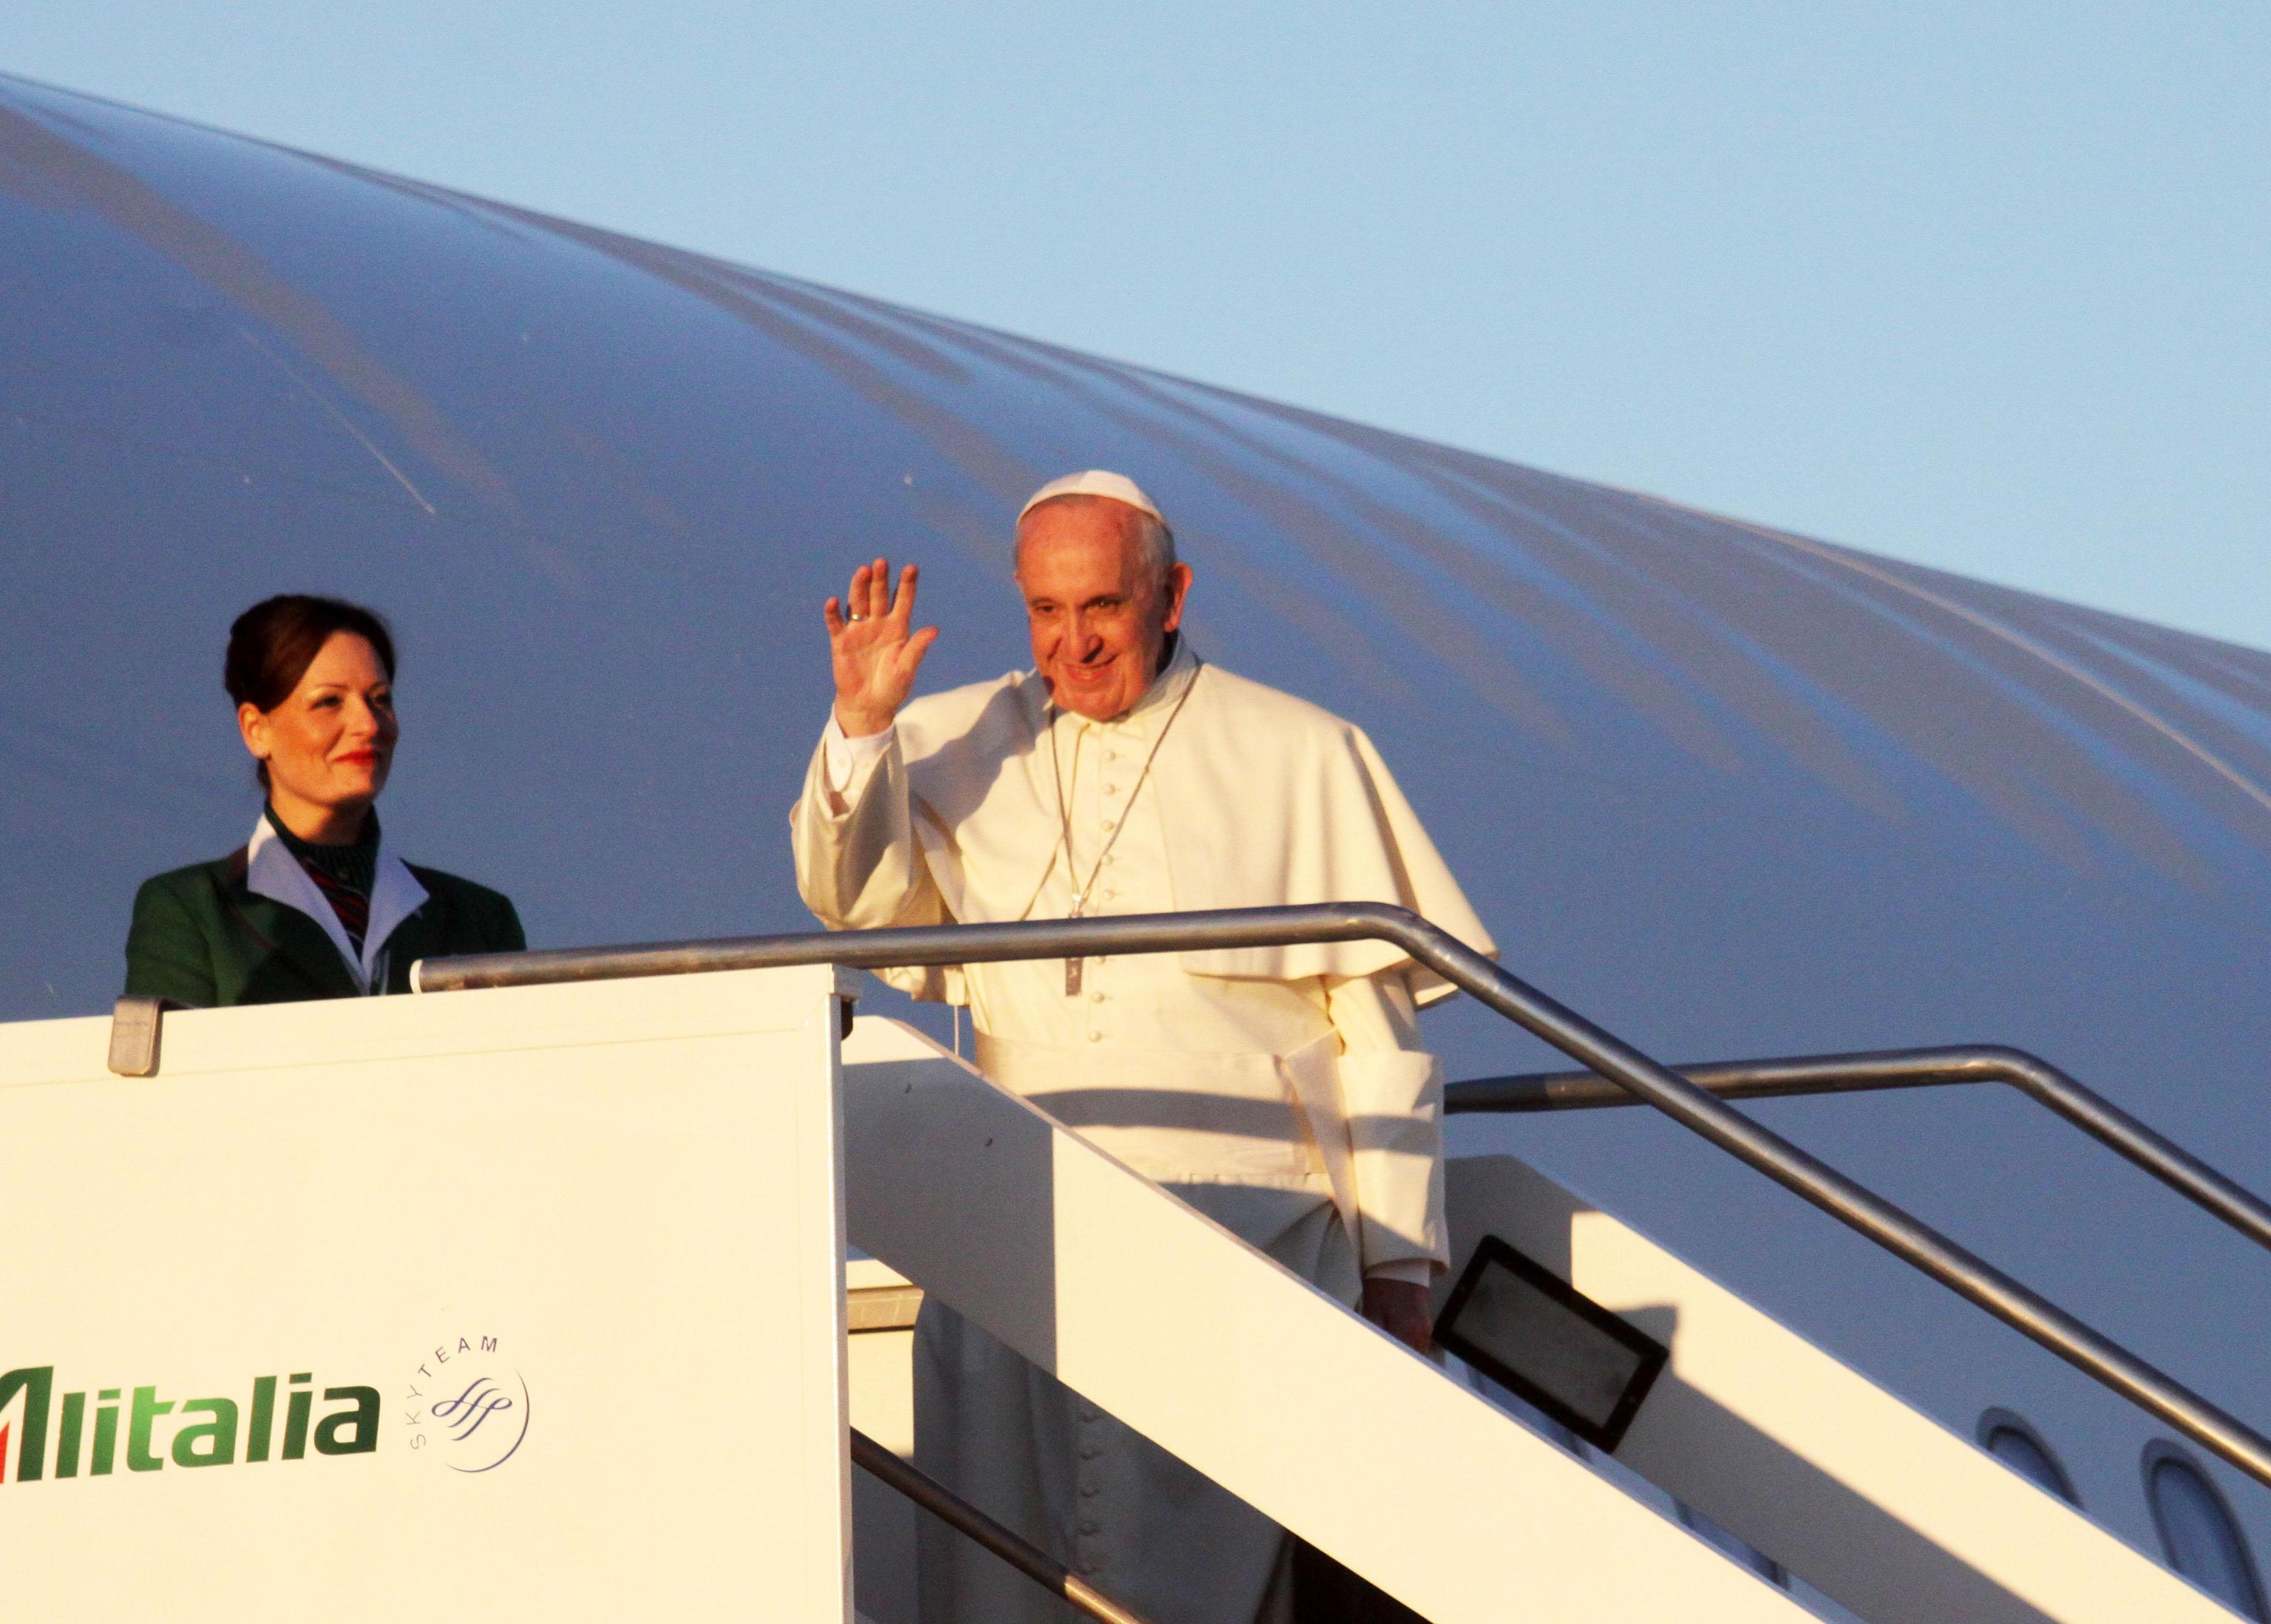 Pope Francis boards an Alitalia airplane at Rome's Fiumicino International Airport